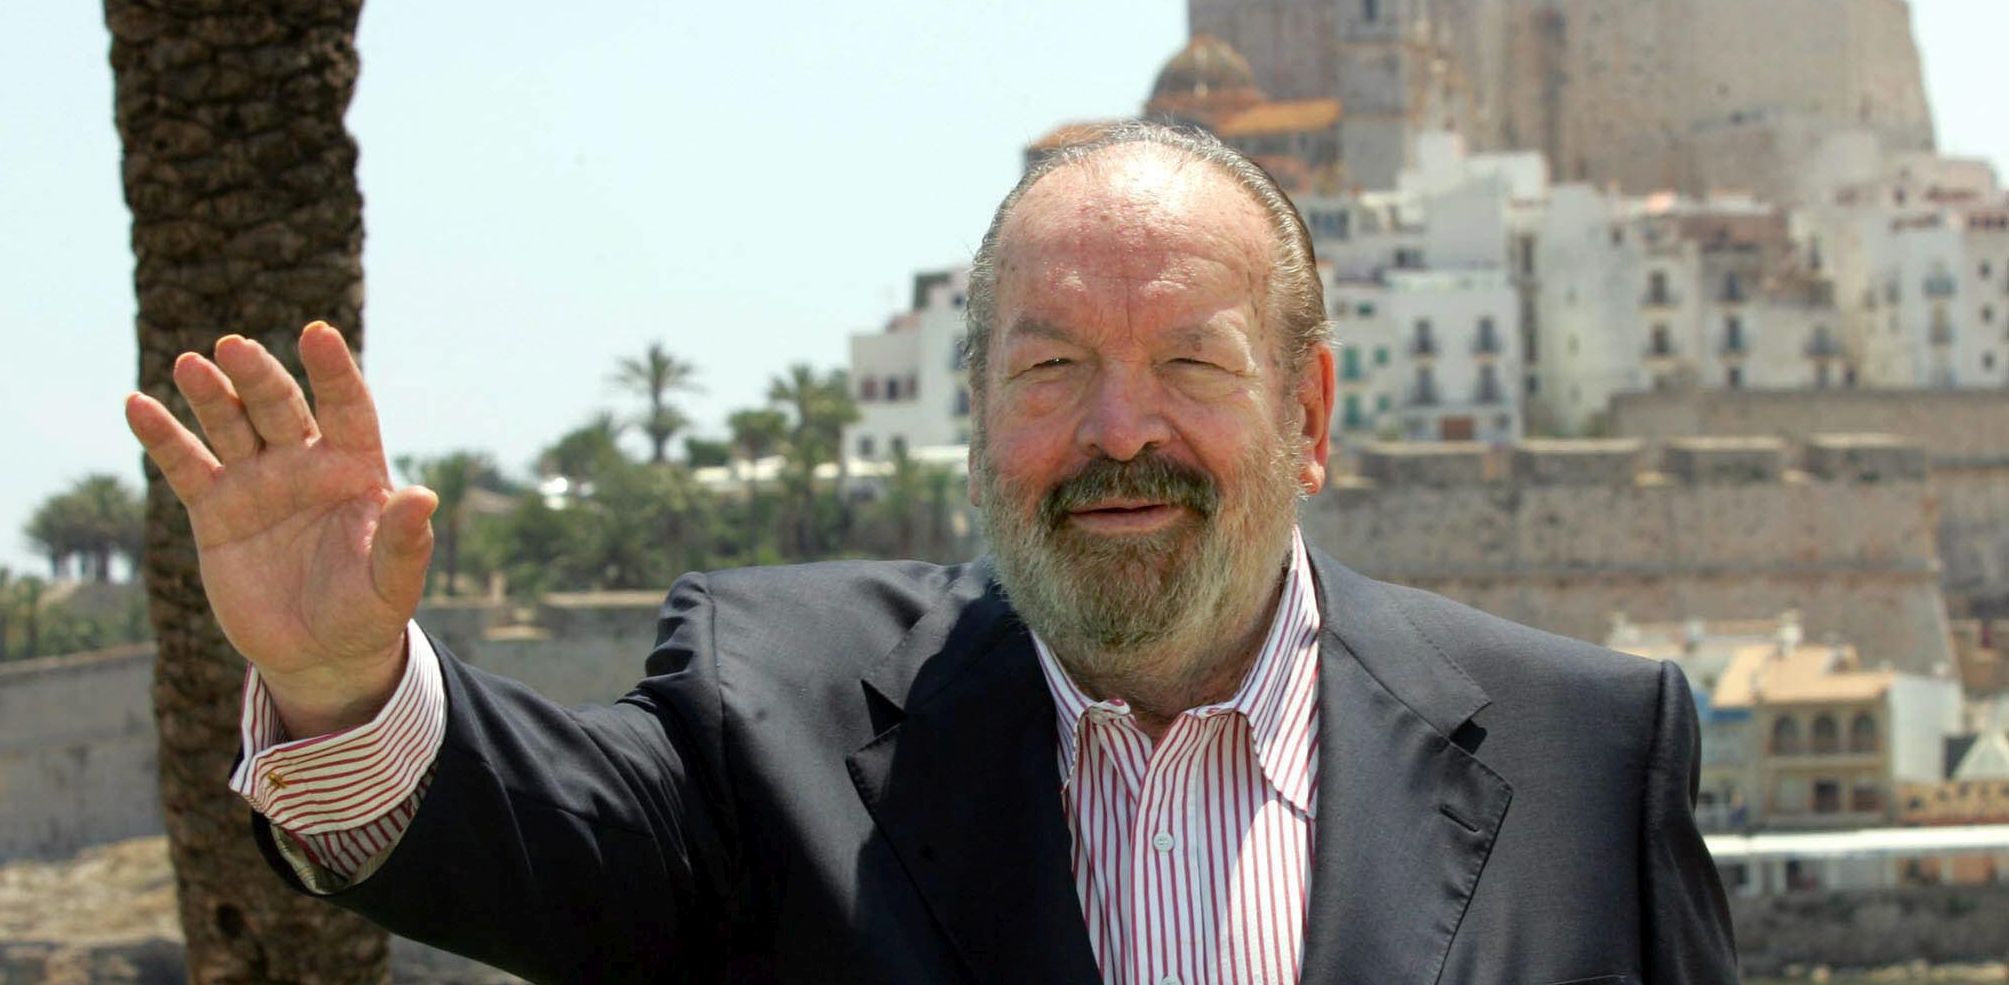 epa05395421 (FILE) A file picture dated 01 June 2004 shows Italian actor Bud Spencer posing in front of the Peniscola Castle, in Peniscola, Spain. According to media reports, Spencer has died on 27 June 2016. He was 86.  EPA/Domenech Castello